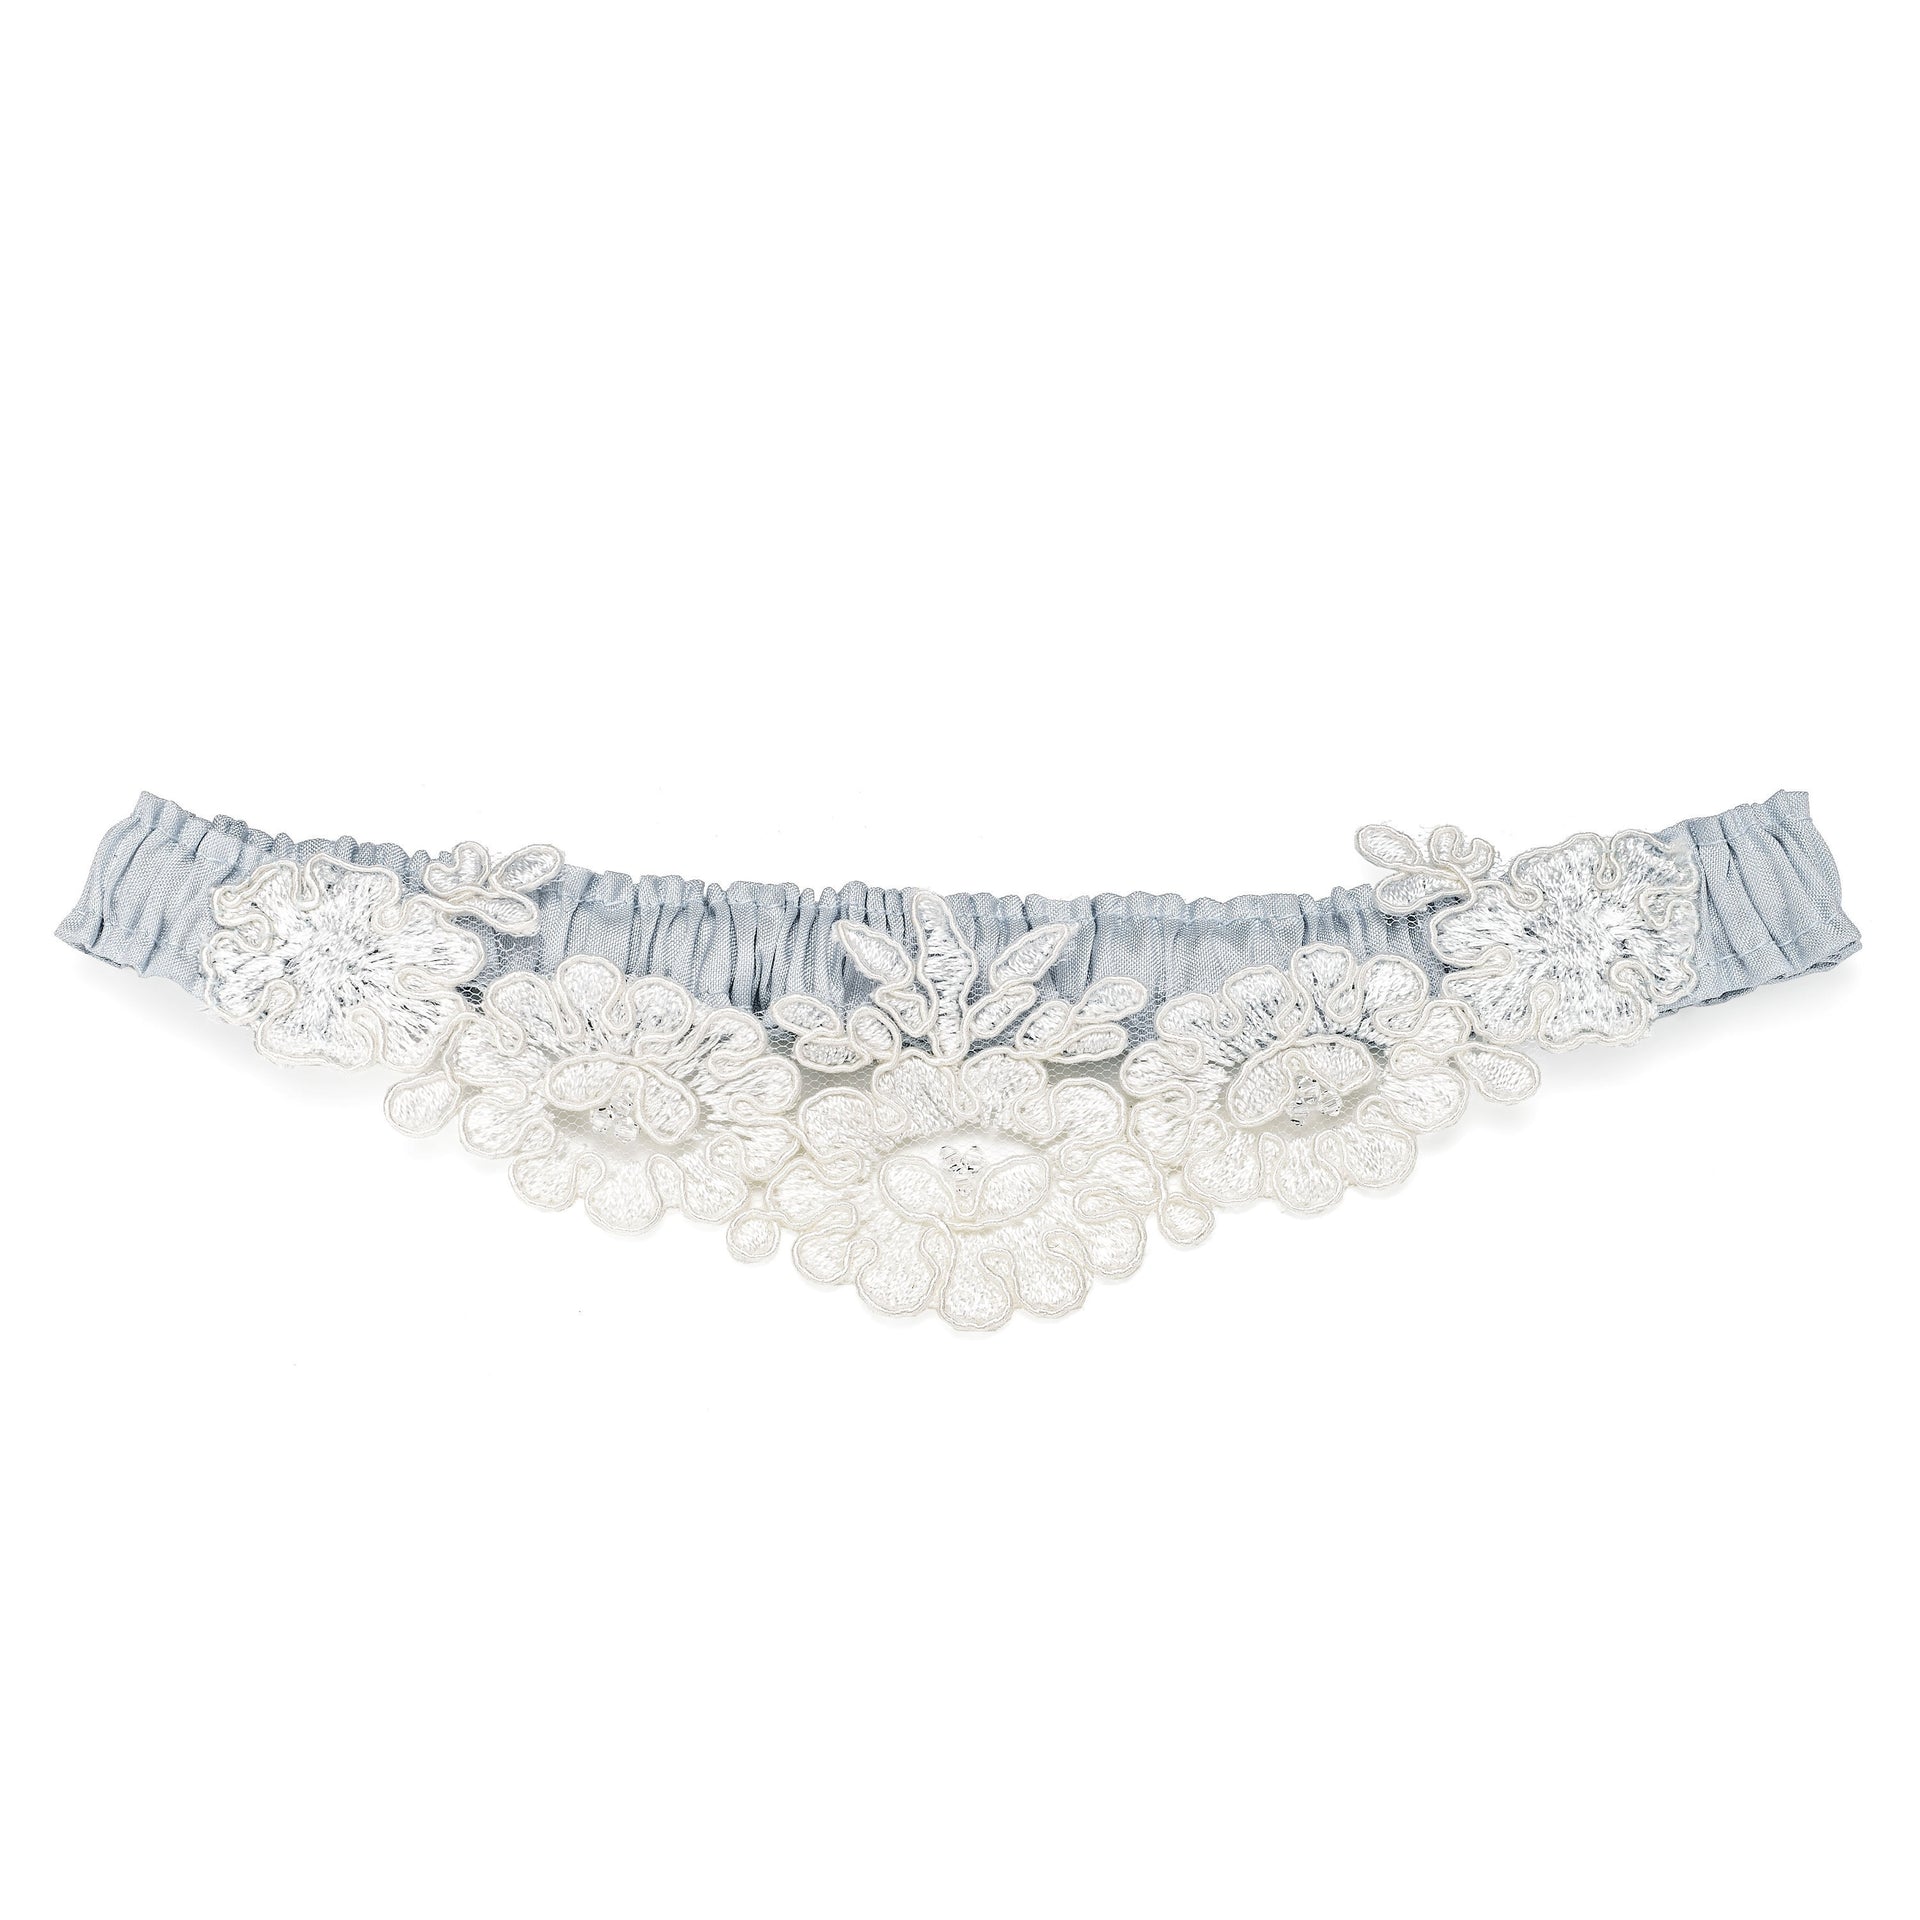 Blue silk and French lace wedding garters, handmade in the UK